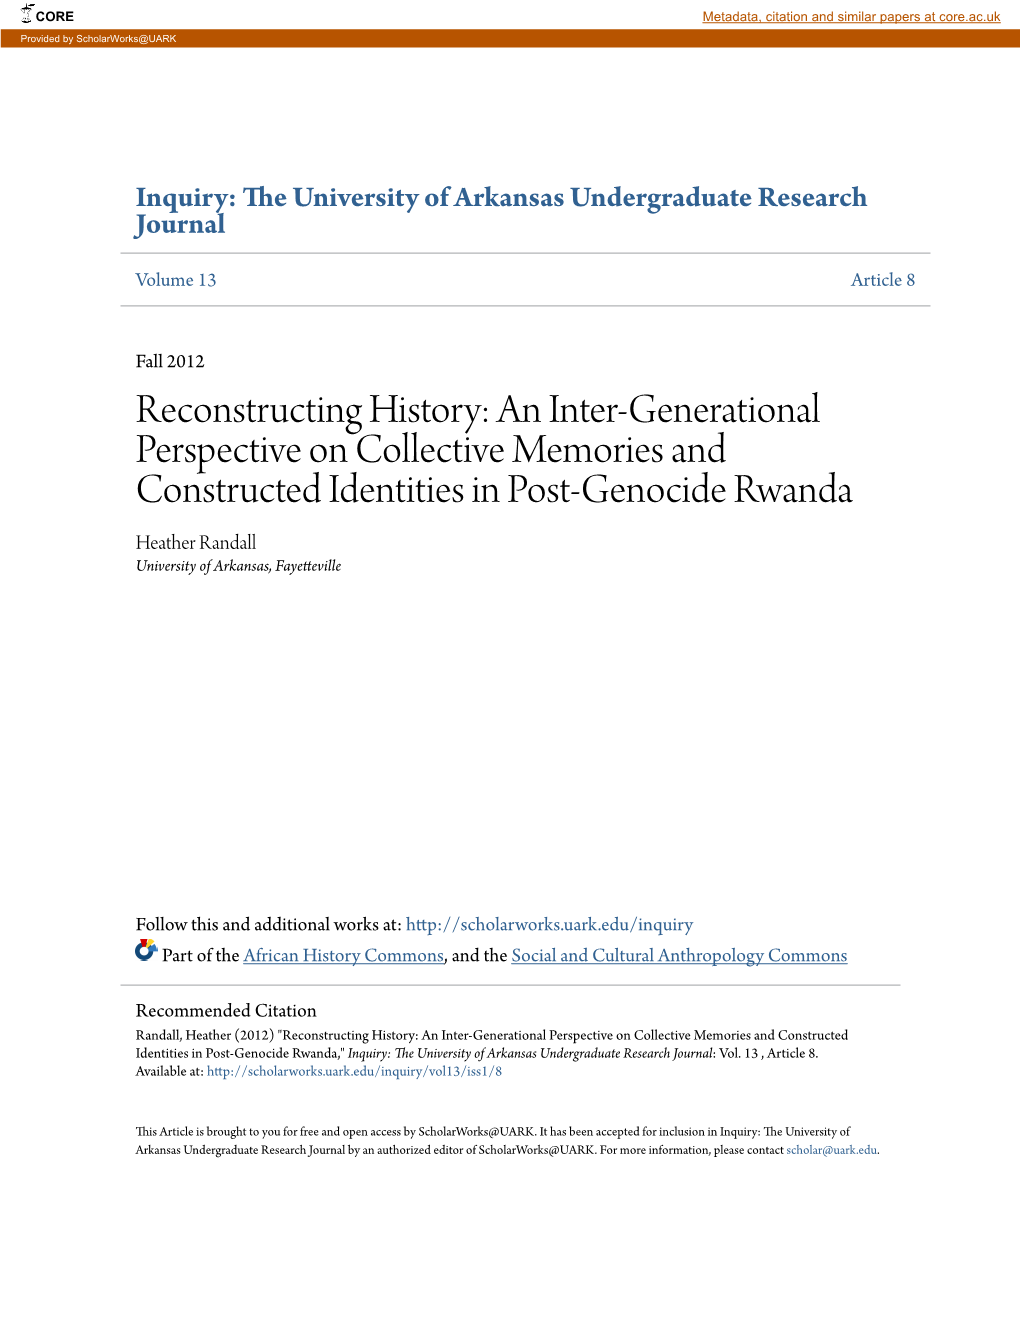 An Inter-Generational Perspective on Collective Memories and Constructed Identities in Post-Genocide Rwanda Heather Randall University of Arkansas, Fayetteville